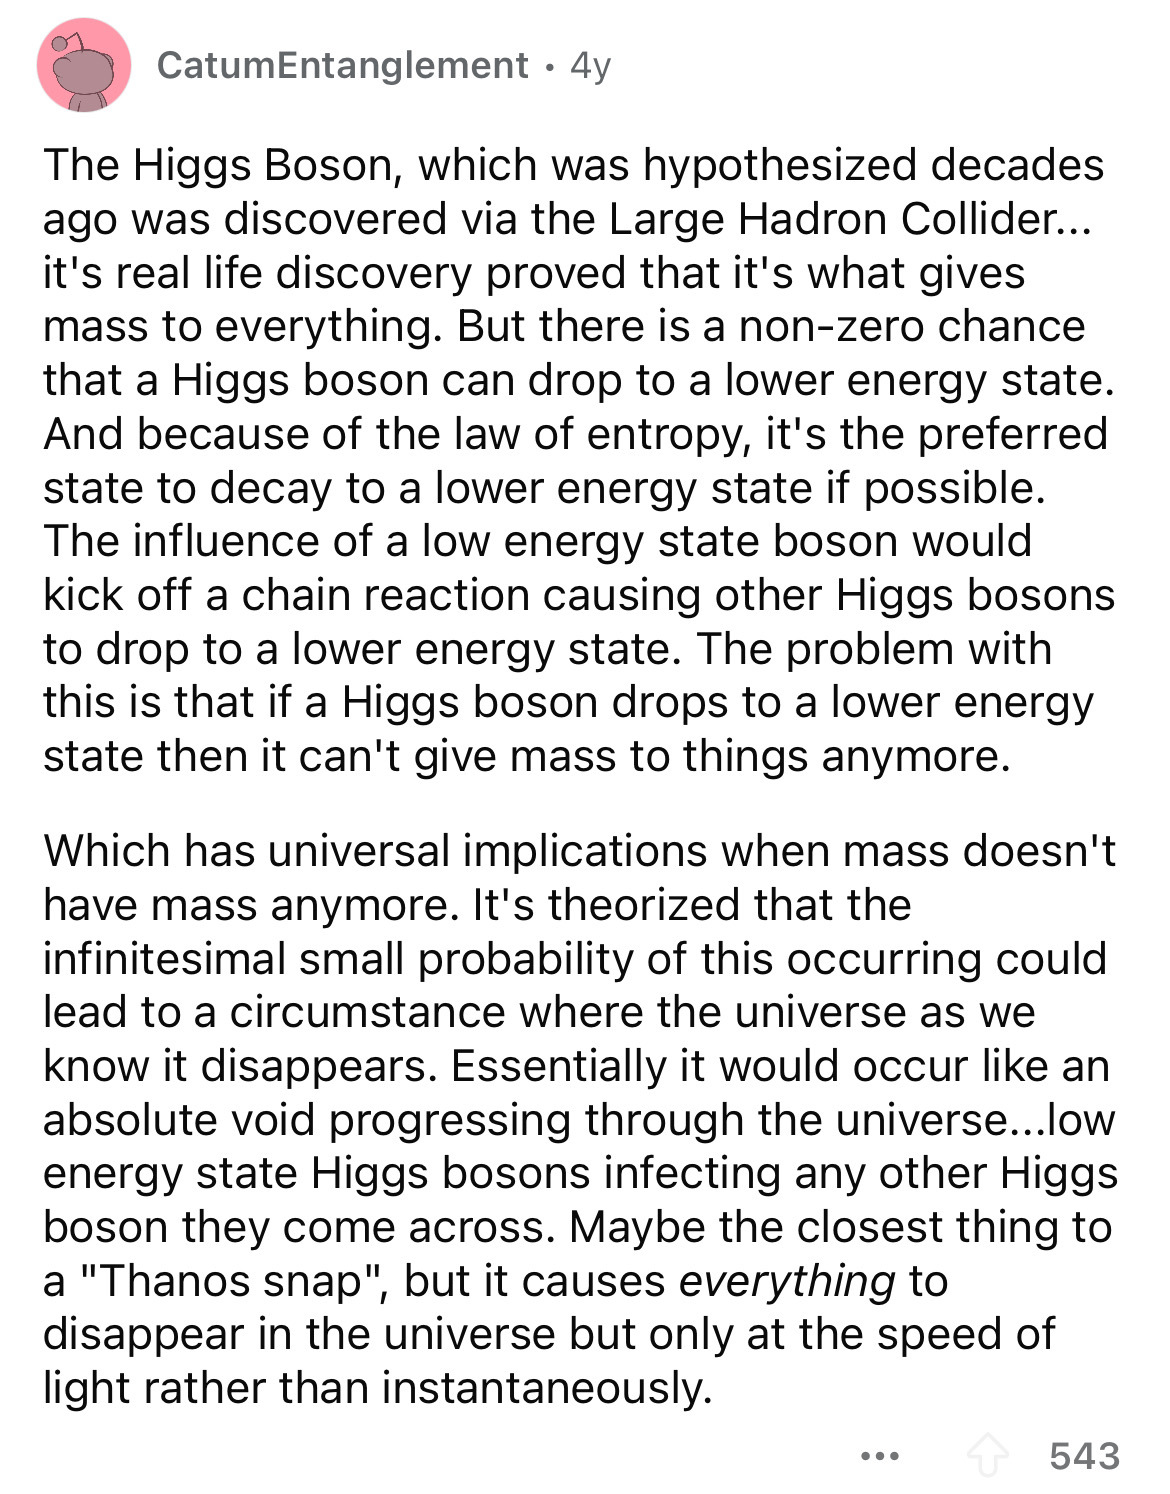 document - CatumEntanglement 4y The Higgs Boson, which was hypothesized decades ago was discovered via the Large Hadron Collider... it's real life discovery proved that it's what gives mass to everything. But there is a nonzero chance that a Higgs boson c